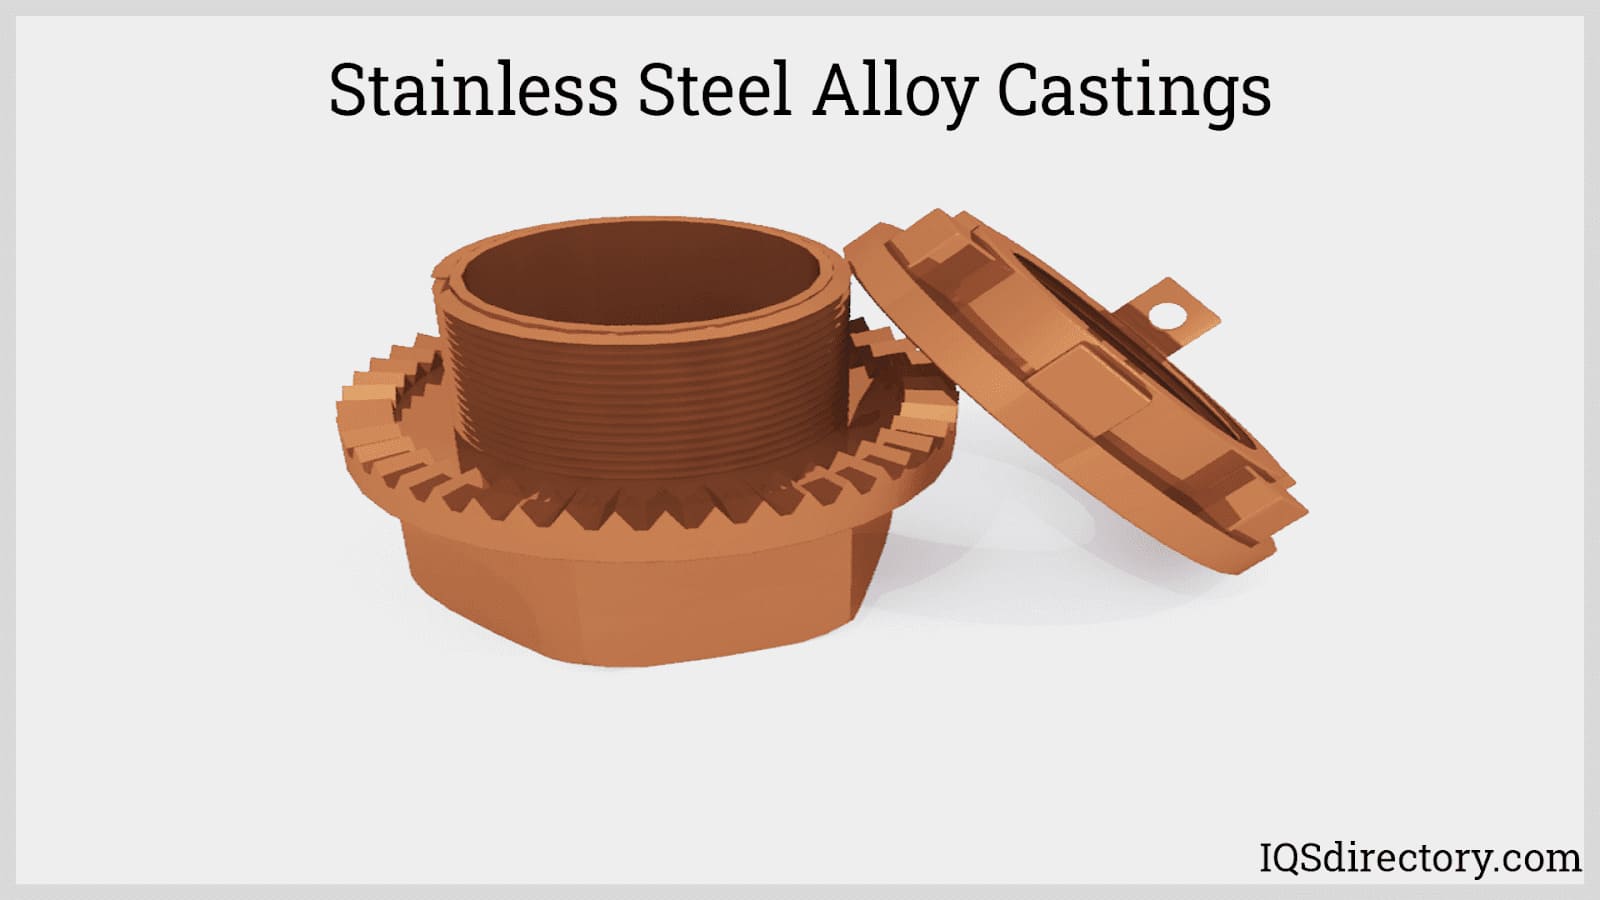 Stainless Steel Alloy Castings